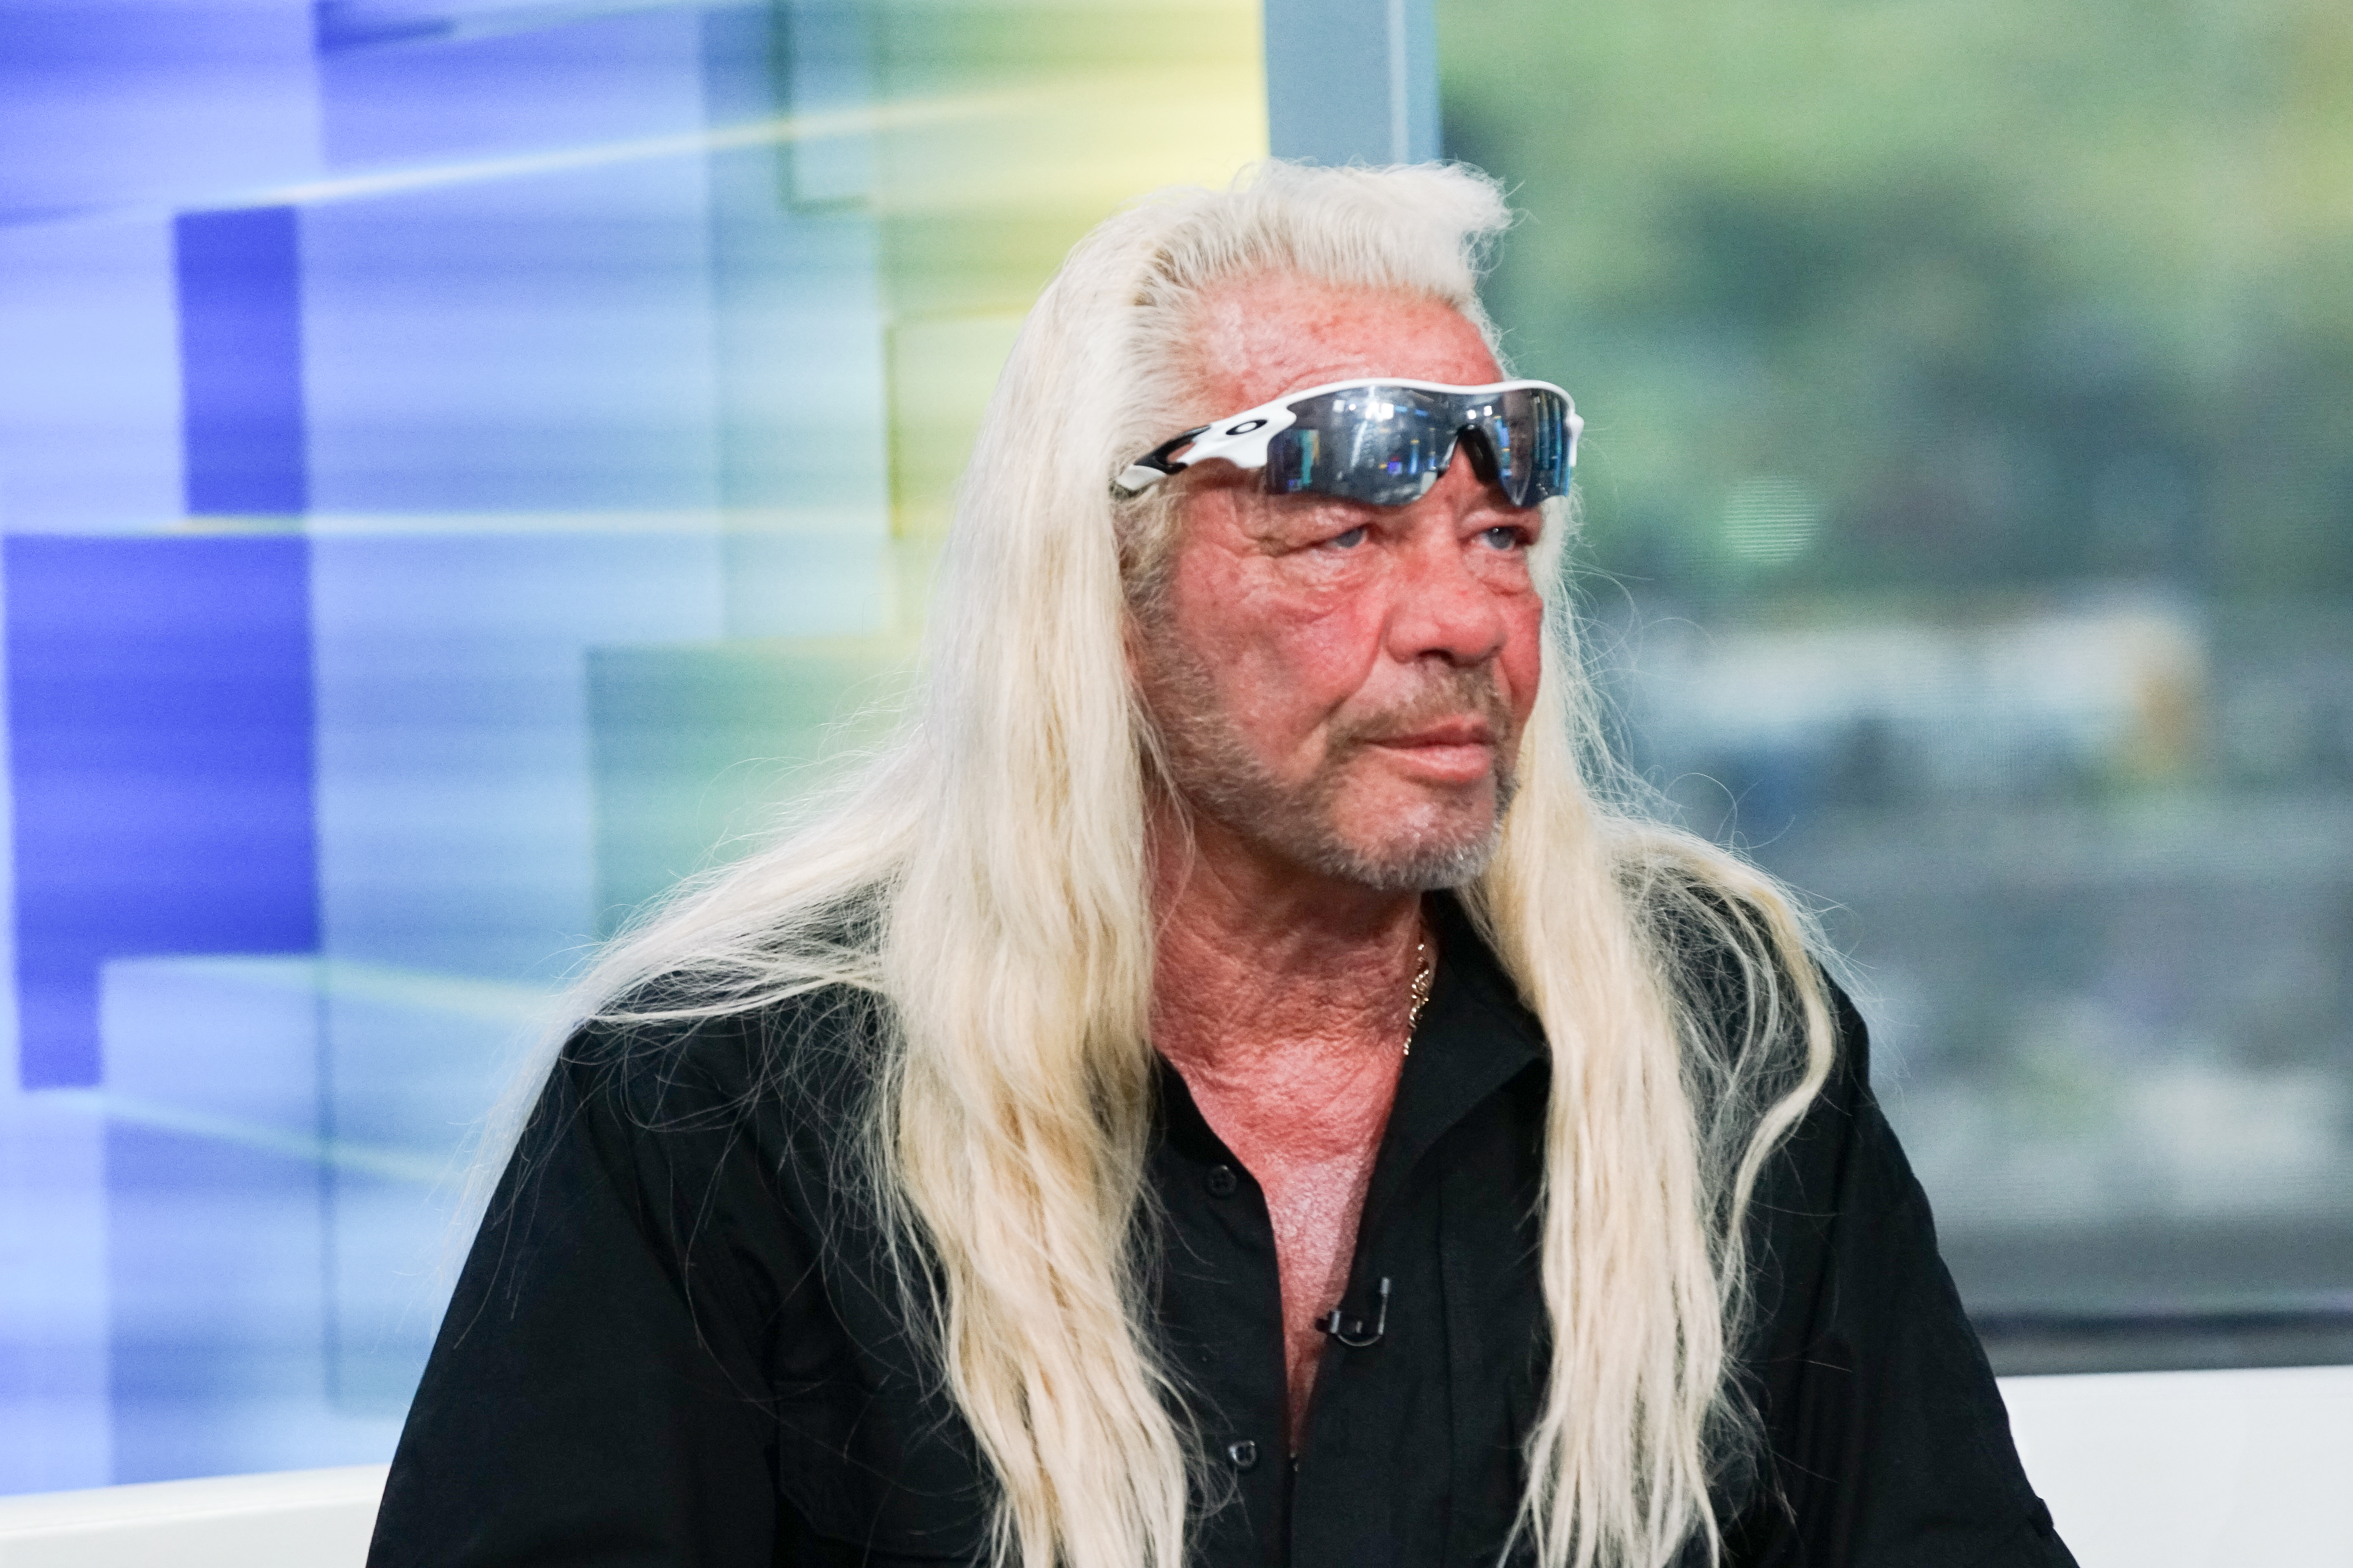 Duane Chapman, a.k.a. Dog the Bounty Hunter, at Fox Studios on August 28, 2019, in New York City | Source: Getty Images